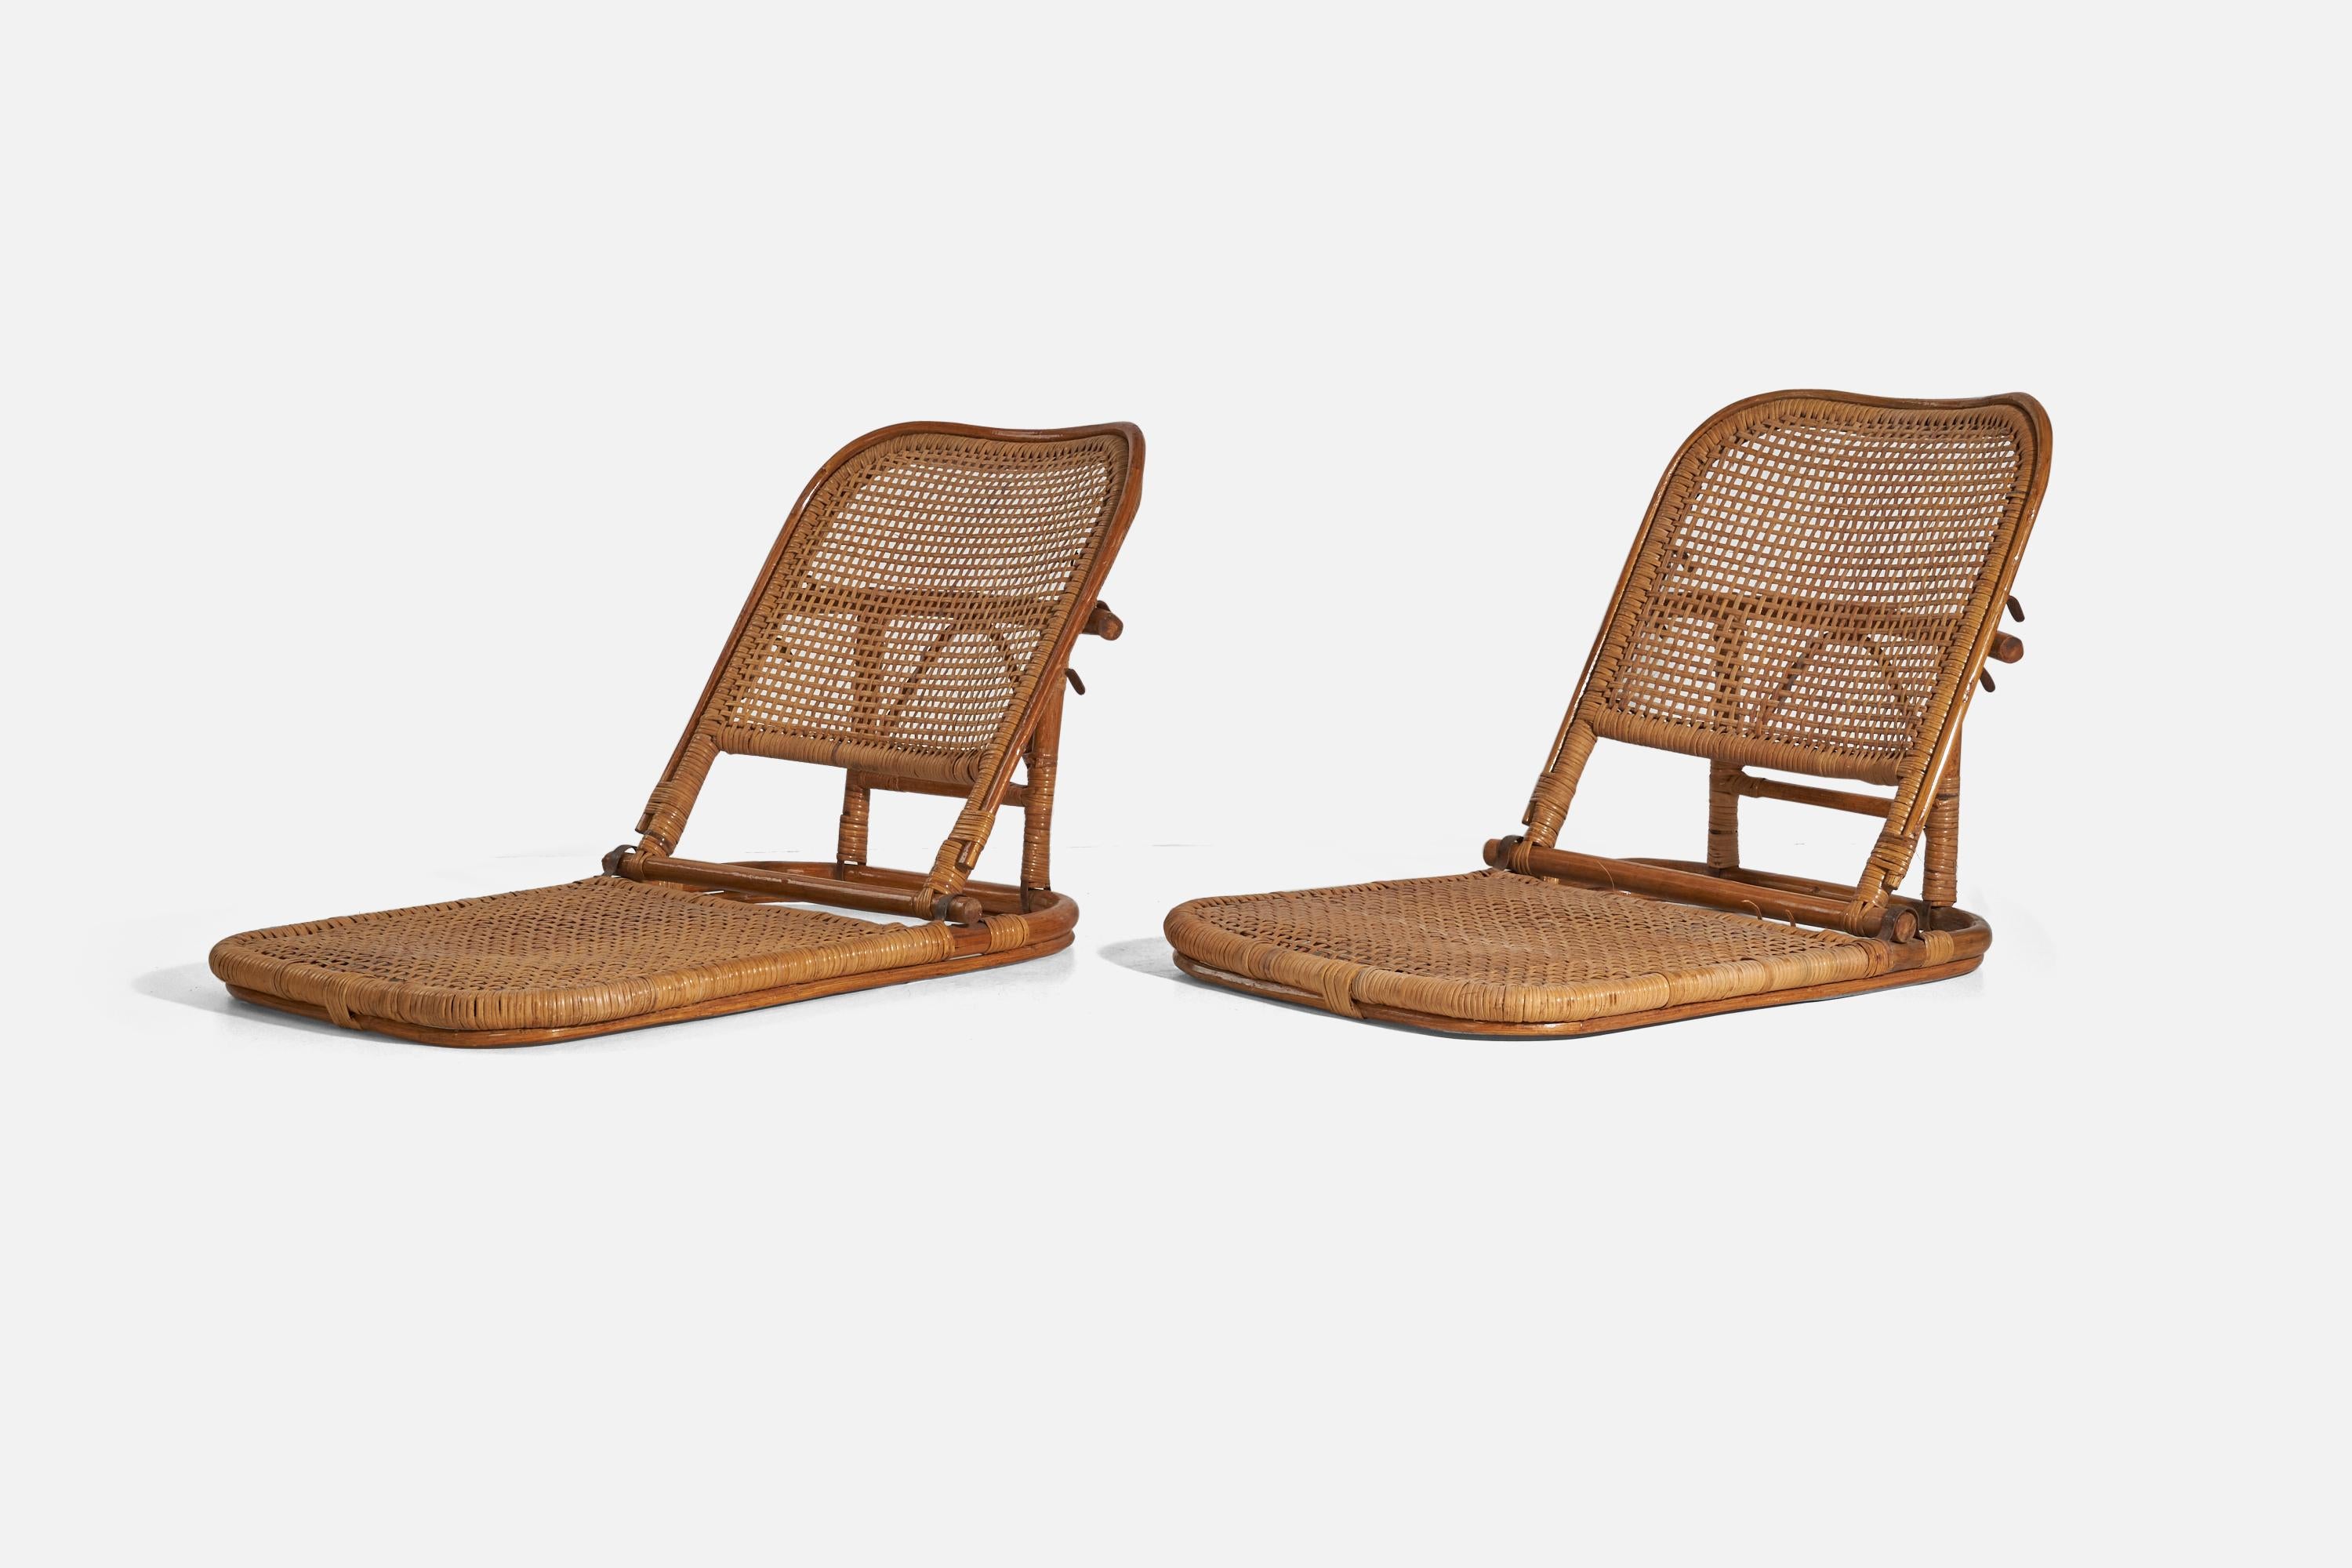 A pair of bamboo, rattan and metal folding lounge chairs designed and produced in the USA, 1950s.